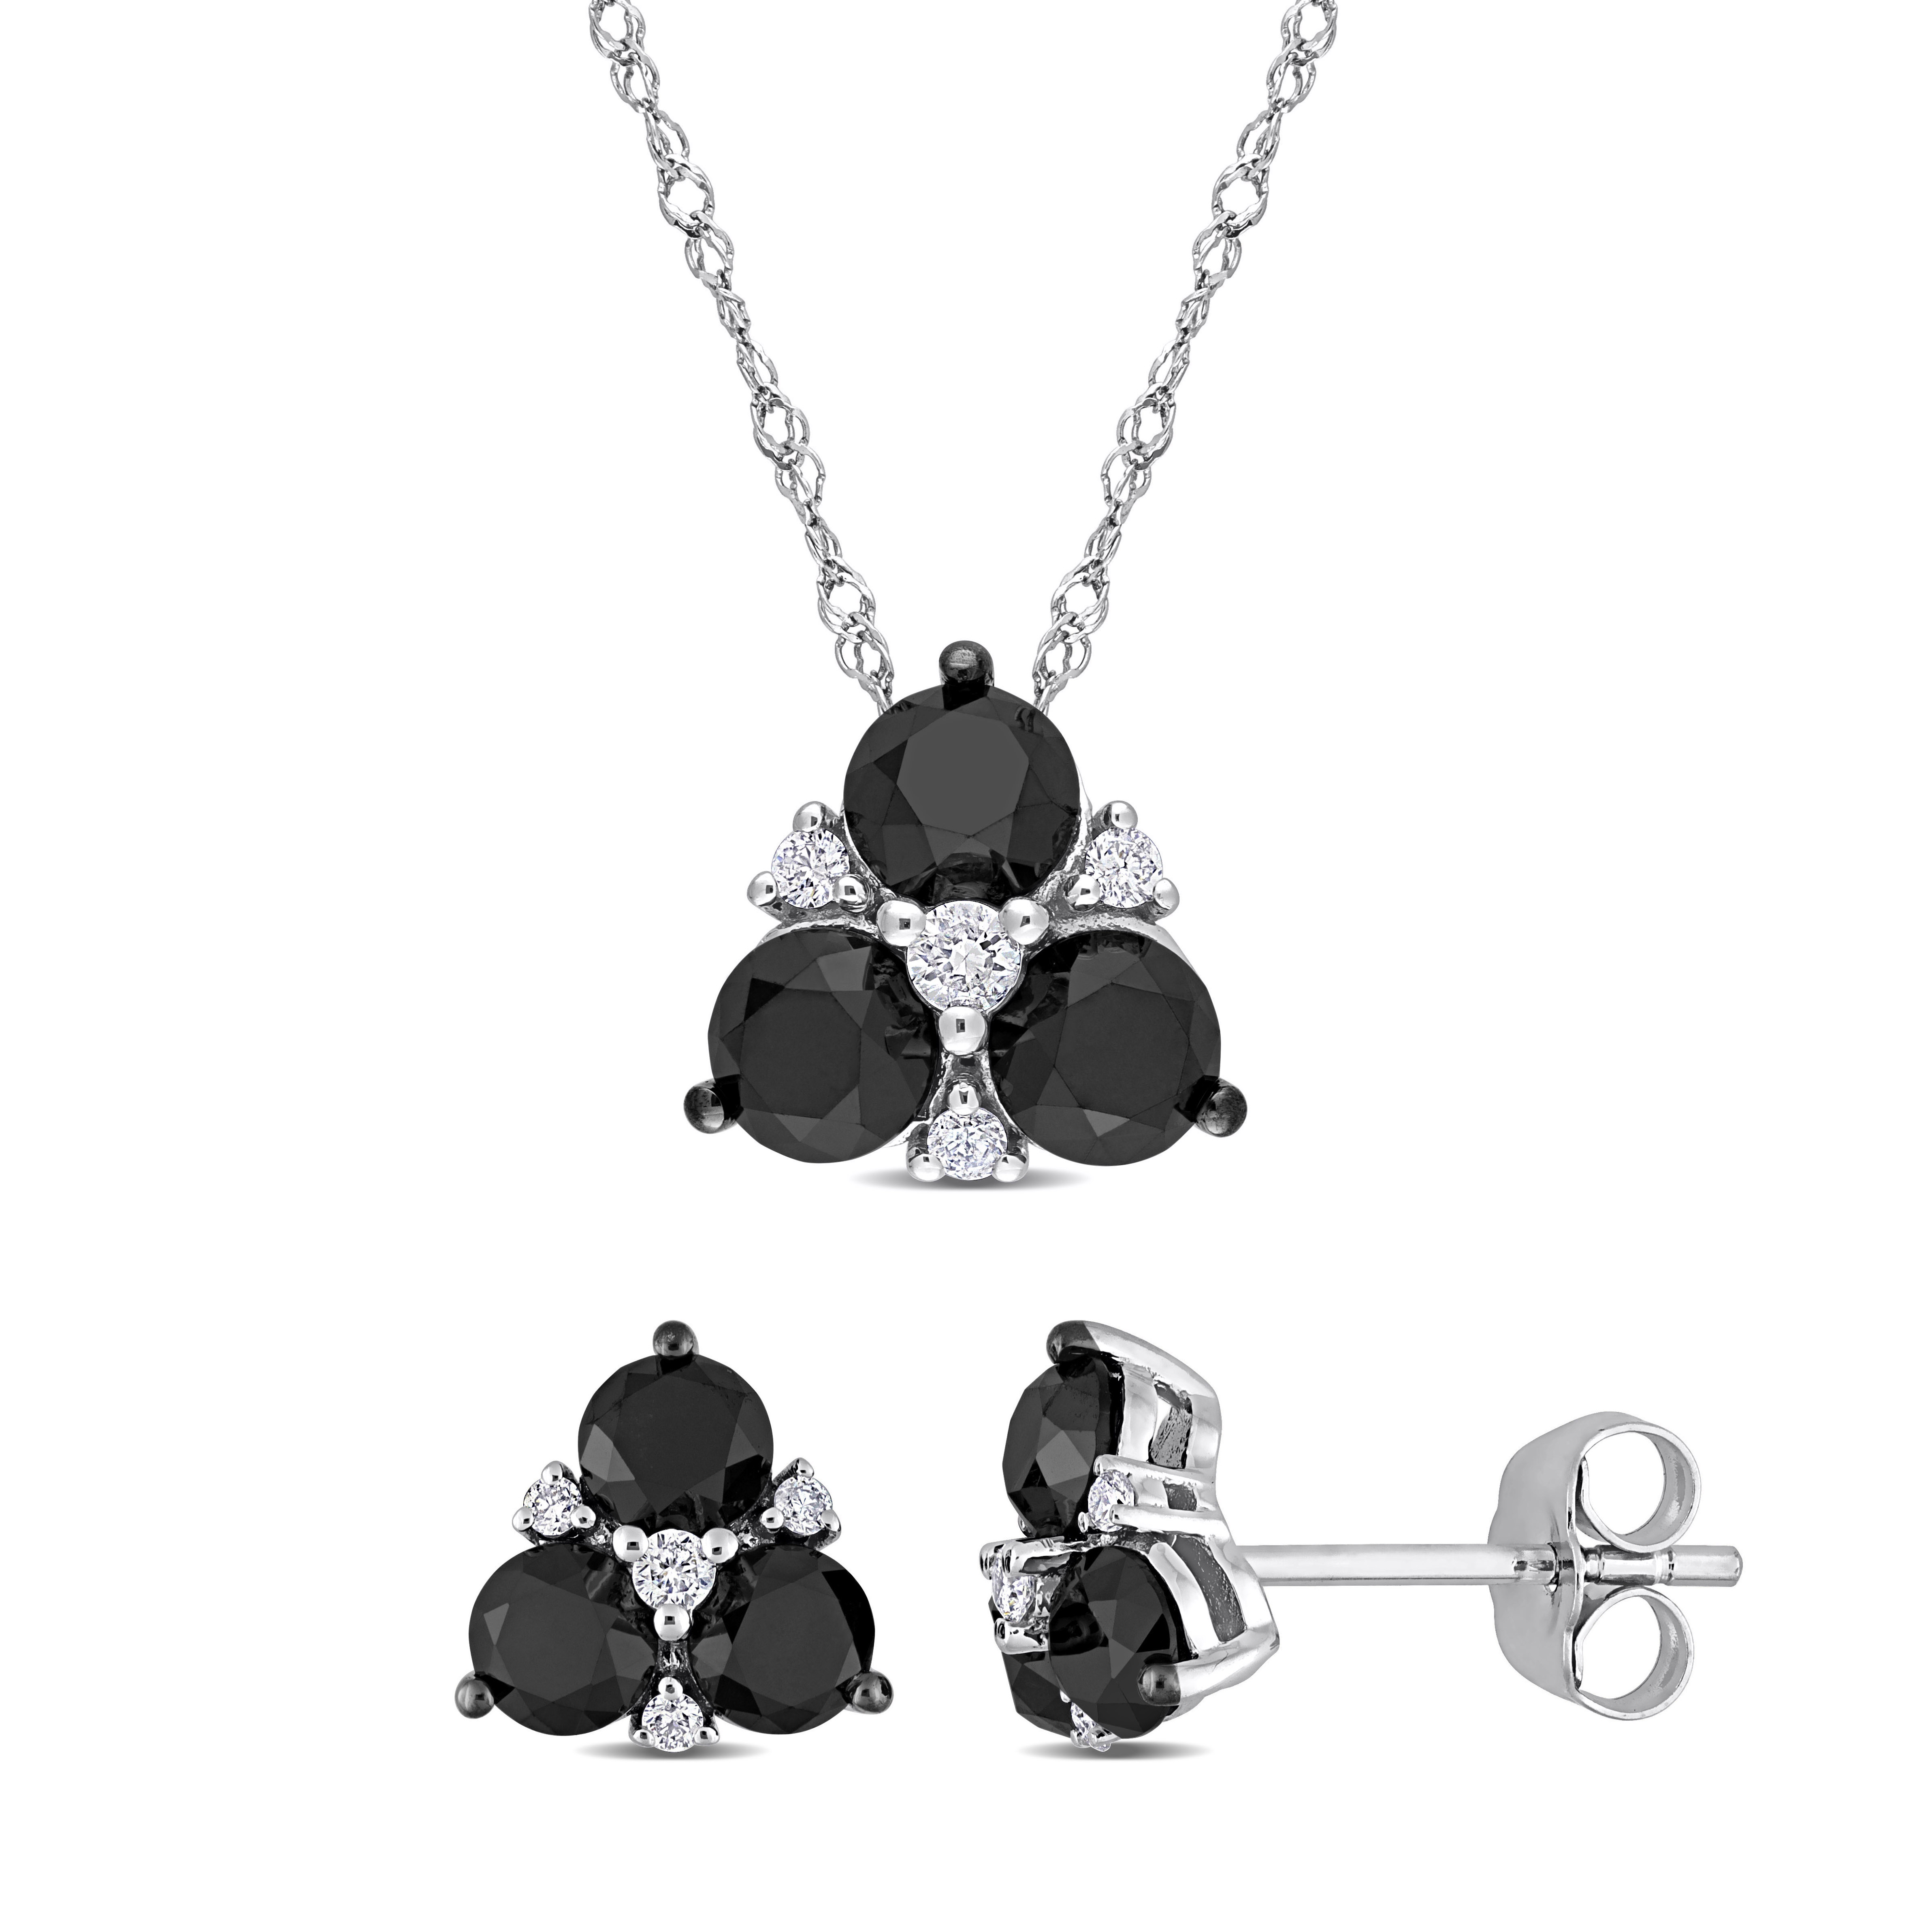 3 CT Black And White Diamond TW Fashion Earrings & Pendant Set With Chain in 10K White Gold